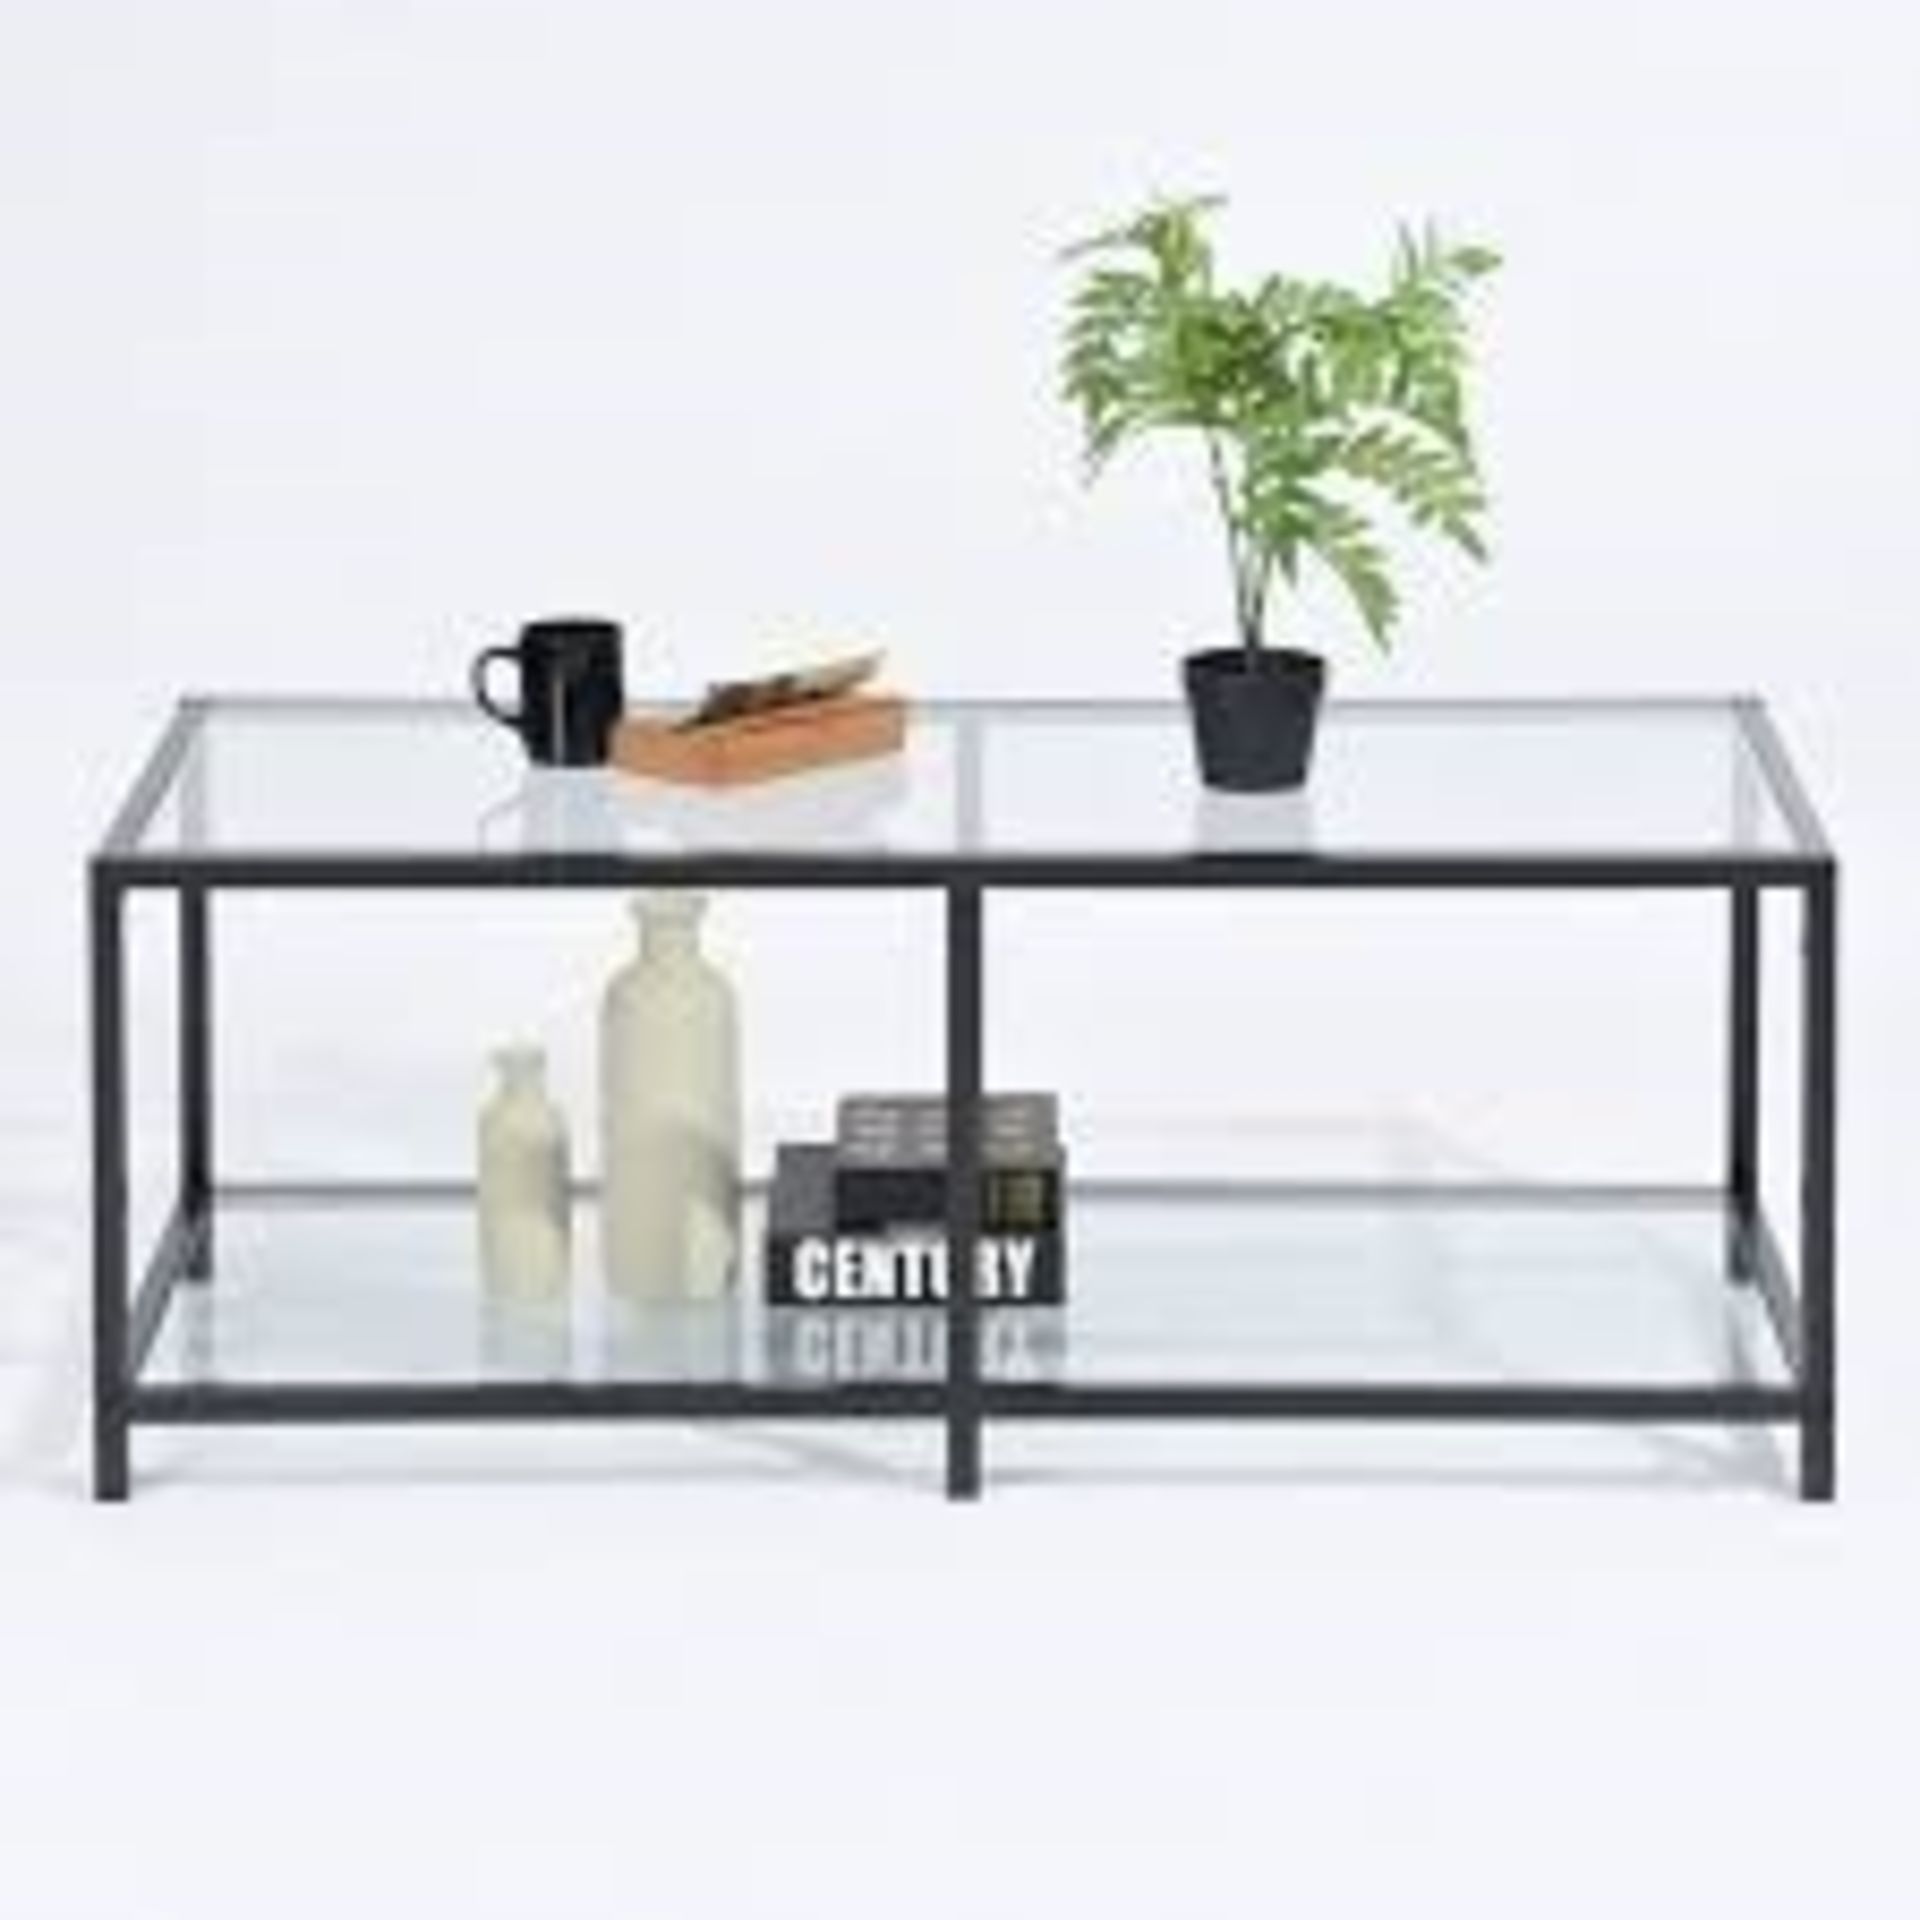 Boxed Redman Coffee Table RRP £75 (17261) (Public Viewing and Appraisals Available)